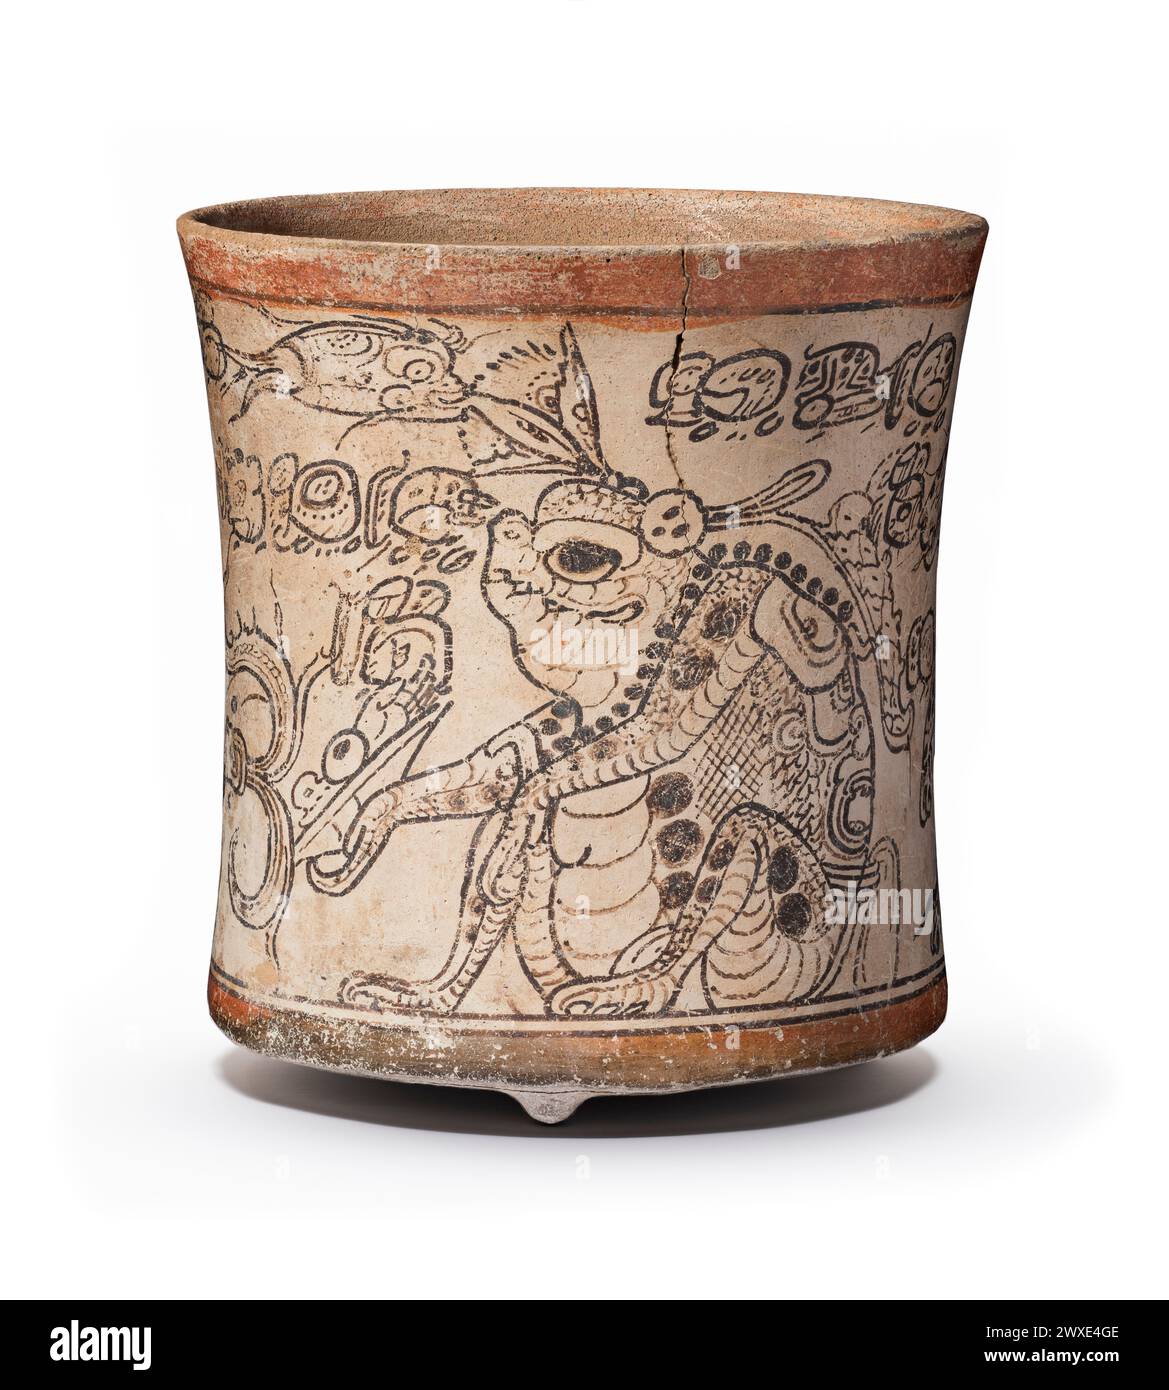 Polychrome Drinking Vessel Depicting Otherworldly Toad, Jaguar, and Serpent. Mexico, Southern Campeche, Maya, 650-800 CE  Vessel depicting highly esoteric scenes describing the fundamental concepts of Maya religious belief and practice and the special role of kings as participants in the supernatural realm.  Elegantly painted ceramic vessels constituted the premier form of artistic expression during the Late Classic period (550-850 AD) of ancient Maya civilisation, and none were more beautifully painted than those known as codex style. Stock Photo